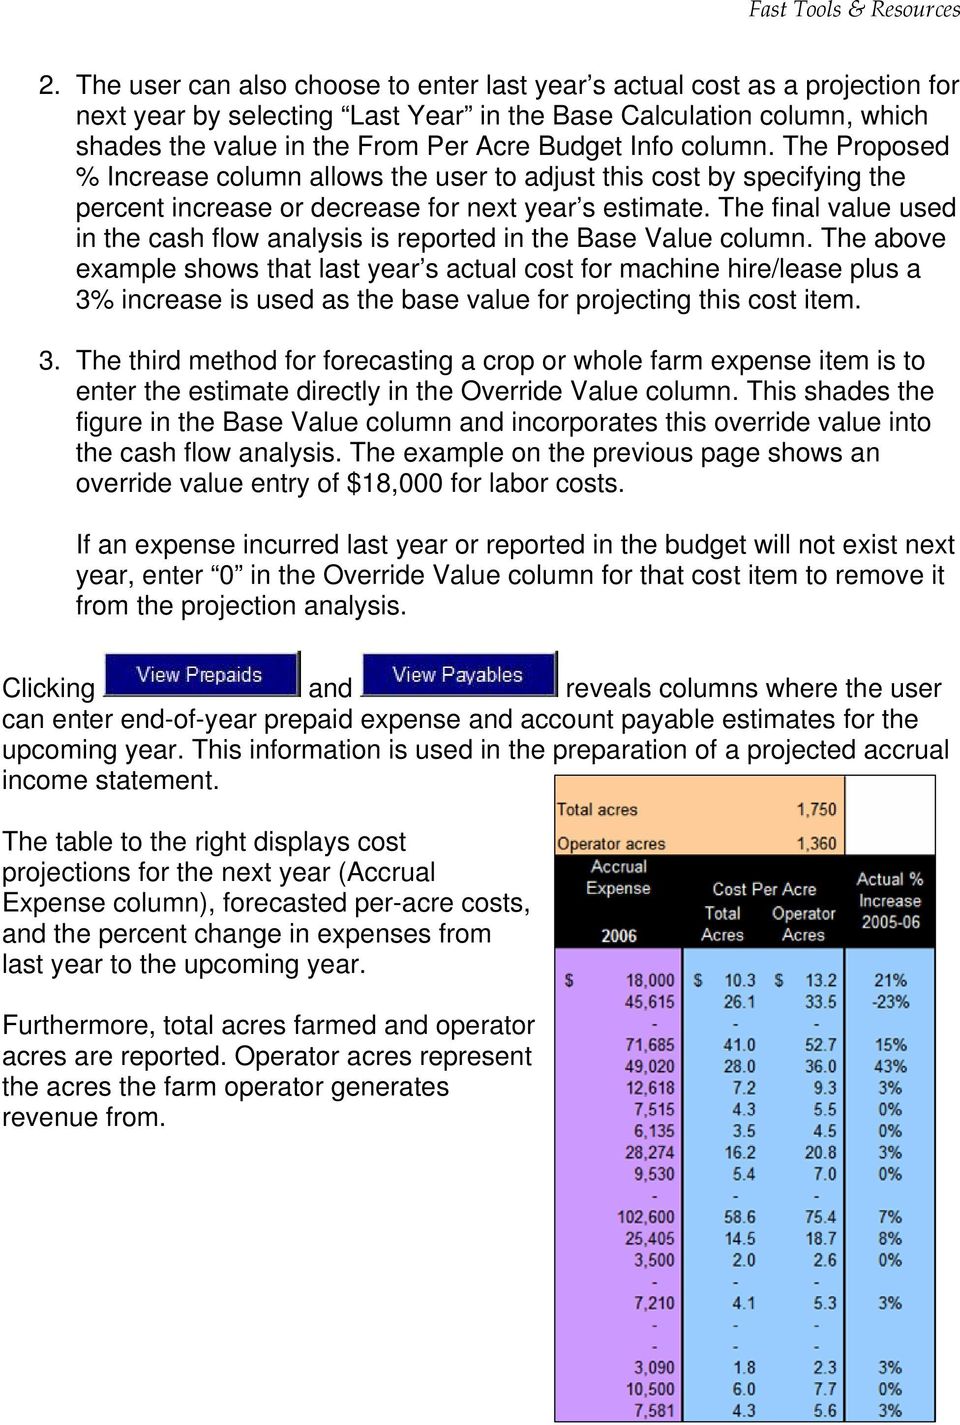 The final value used in the cash flow analysis is reported in the Base Value column.